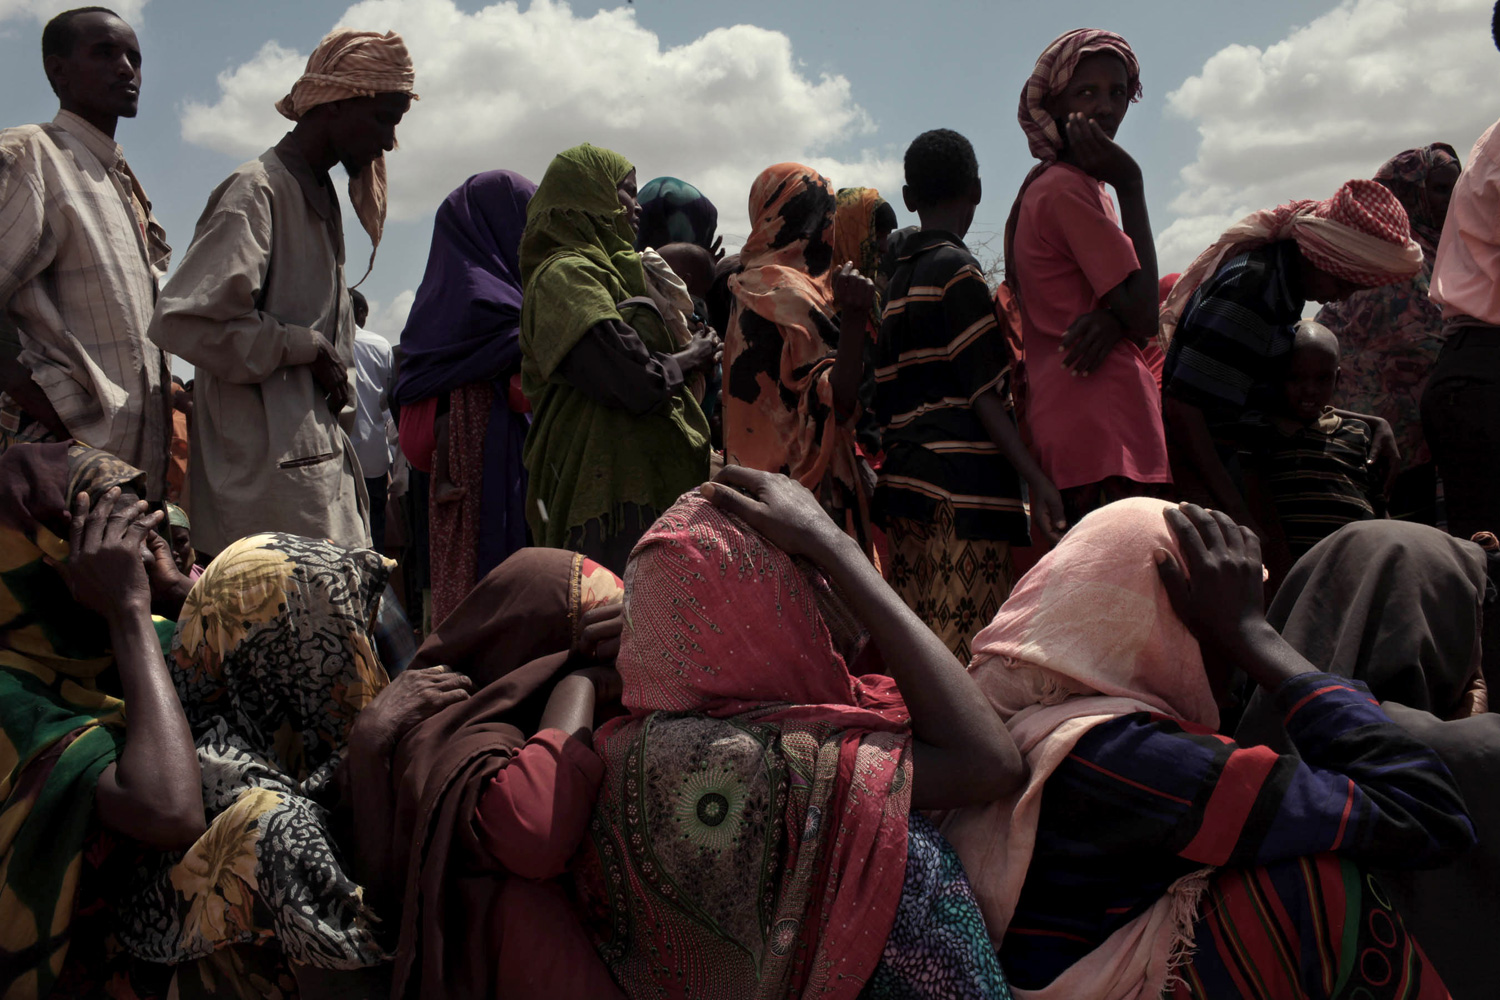 Newly arrived Somali refugees are separated by sex and then made to wait as processing begins. After having their cases processed, they are given clothes, cooking pots and food.